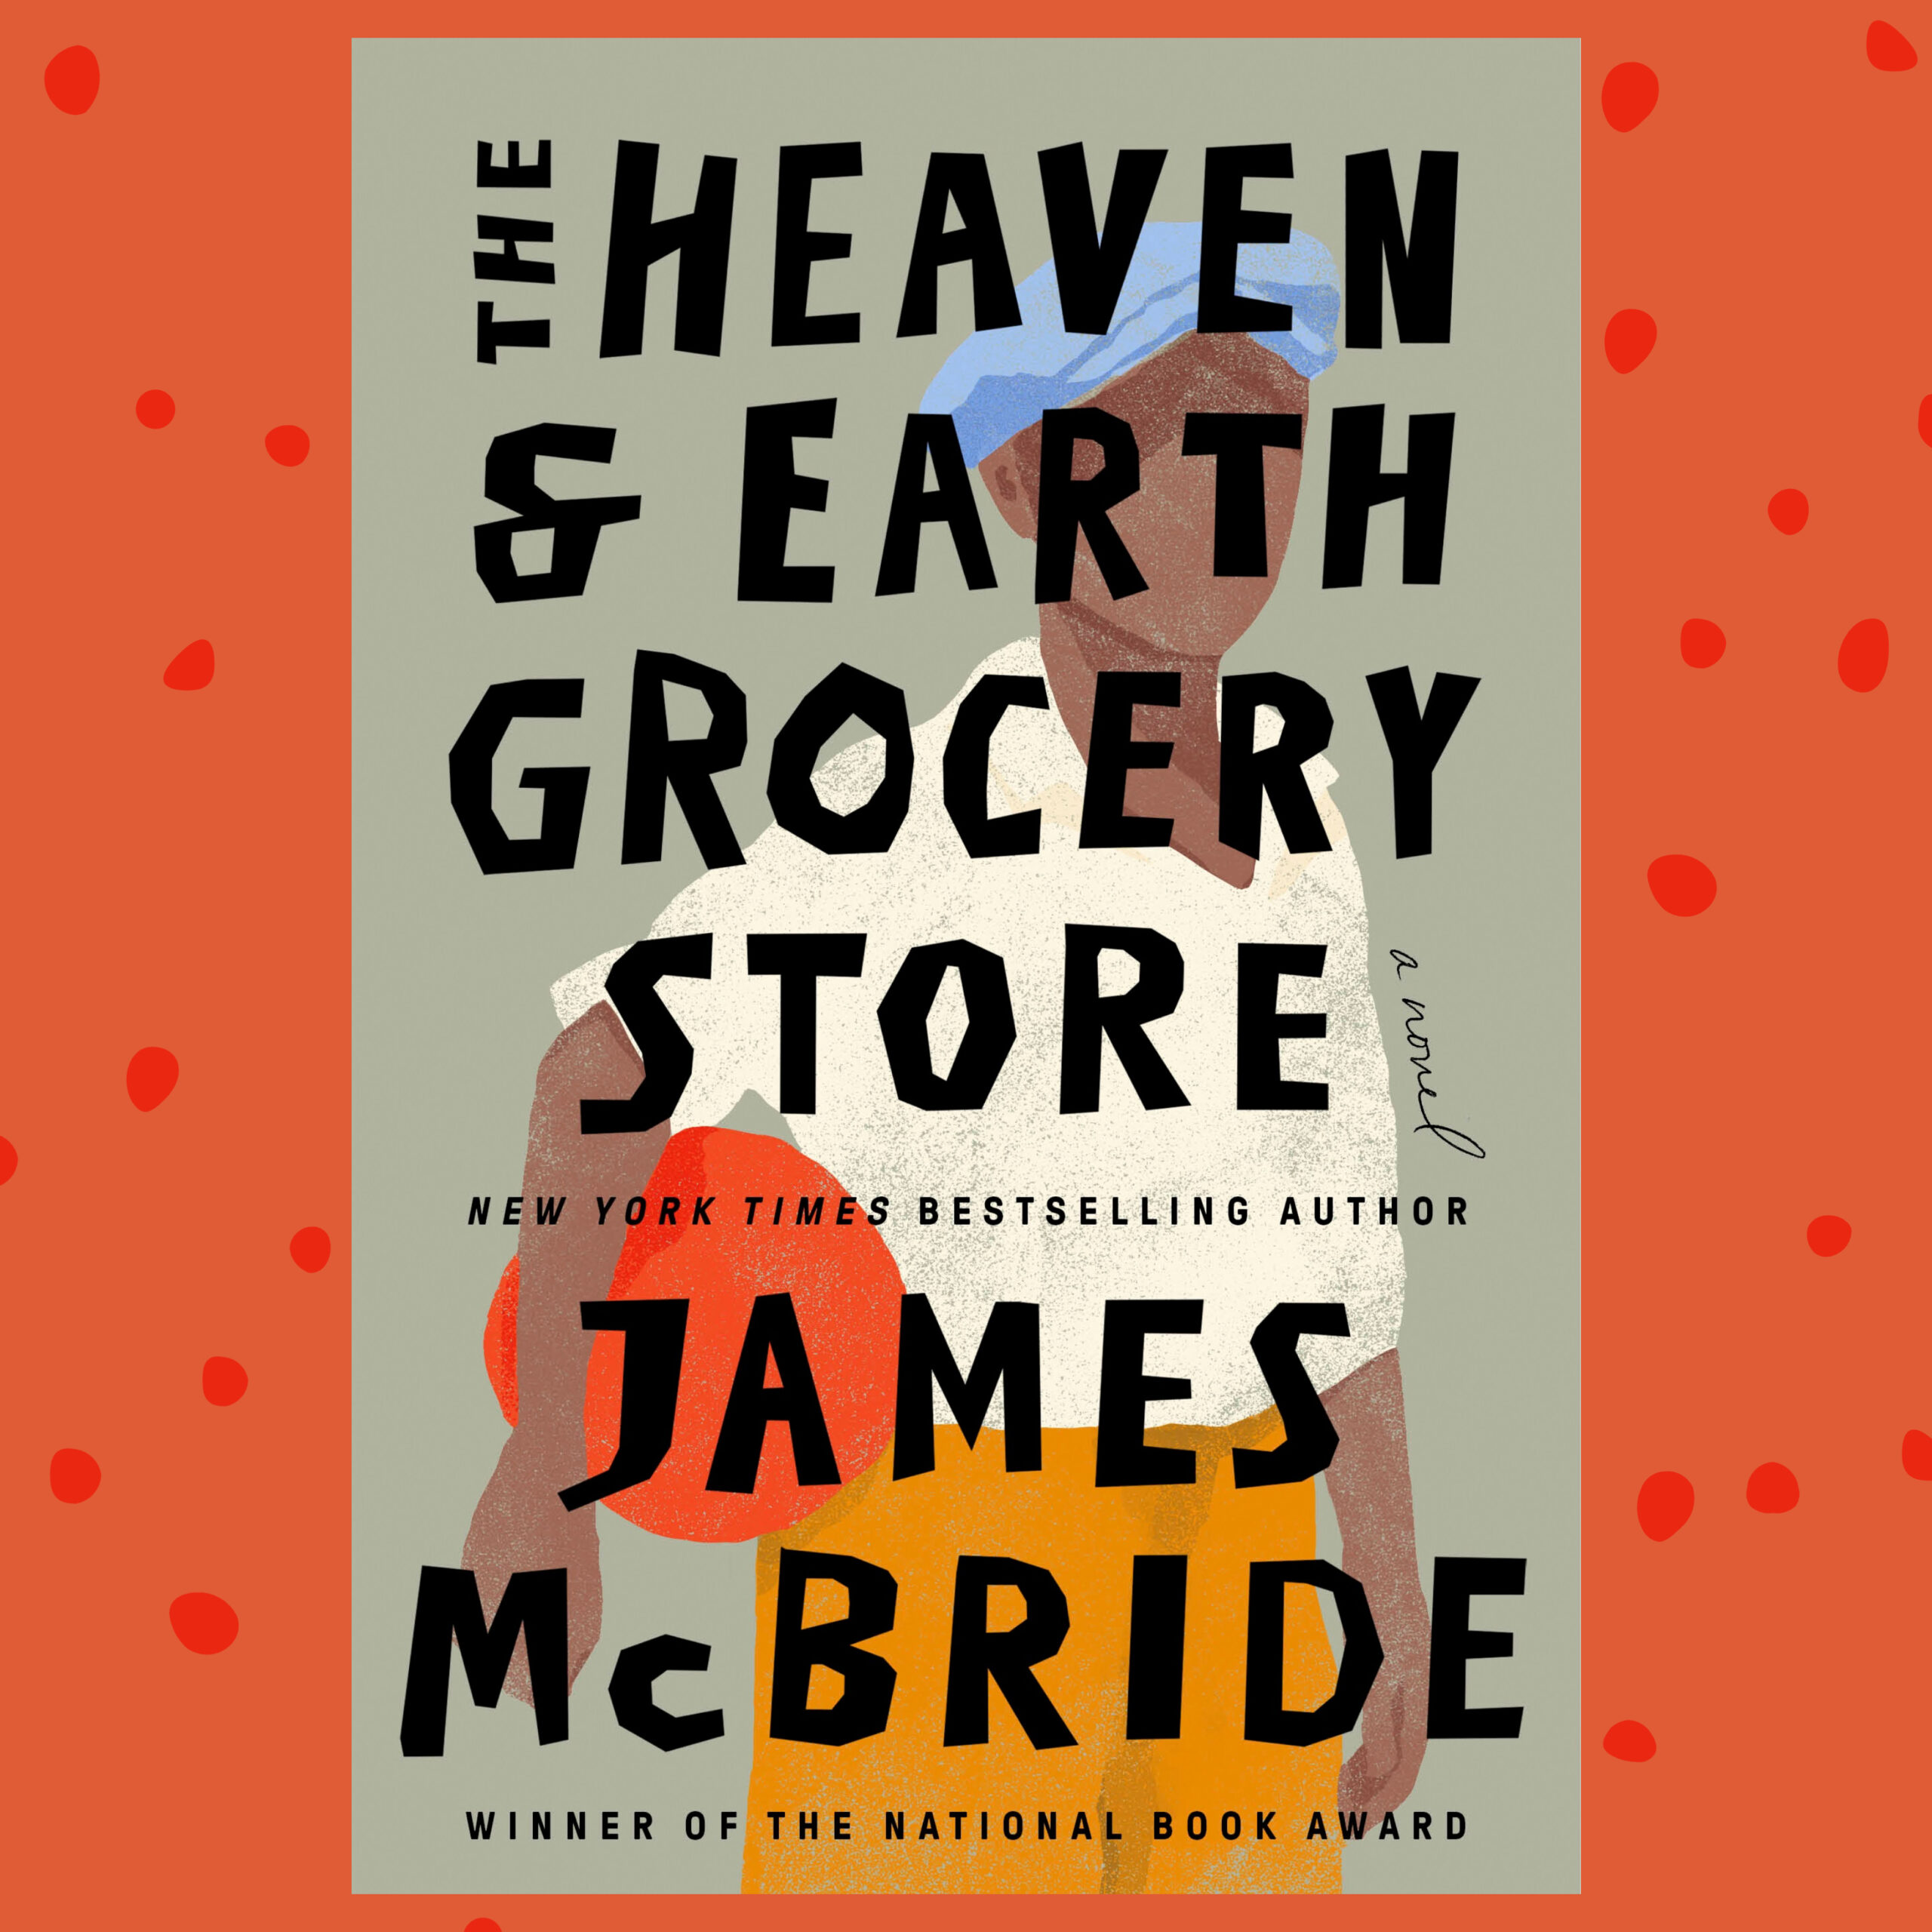 The Book Show - James McBride - The Heaven & Earth Grocery Store: A Novel